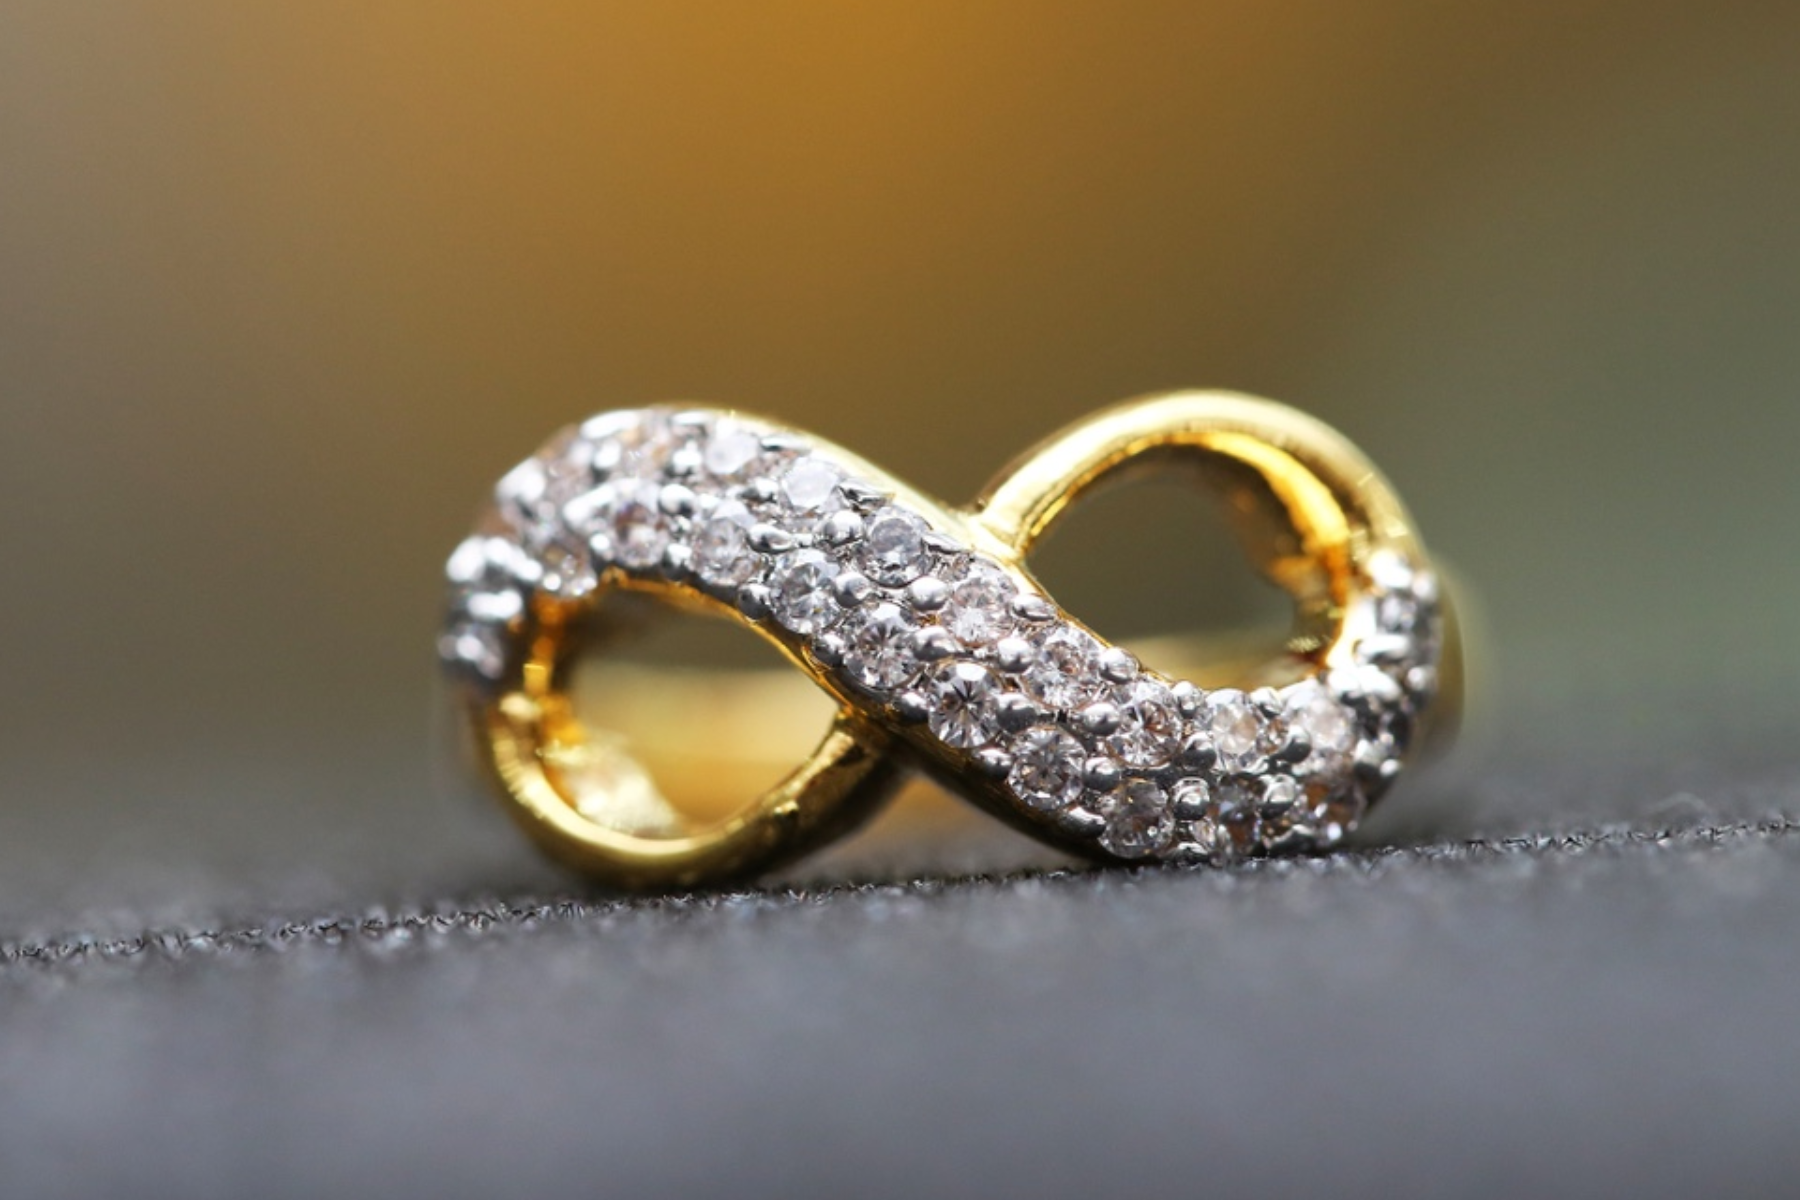 An infinity ring made of gold and diamond, placed on a background with a blurred effec